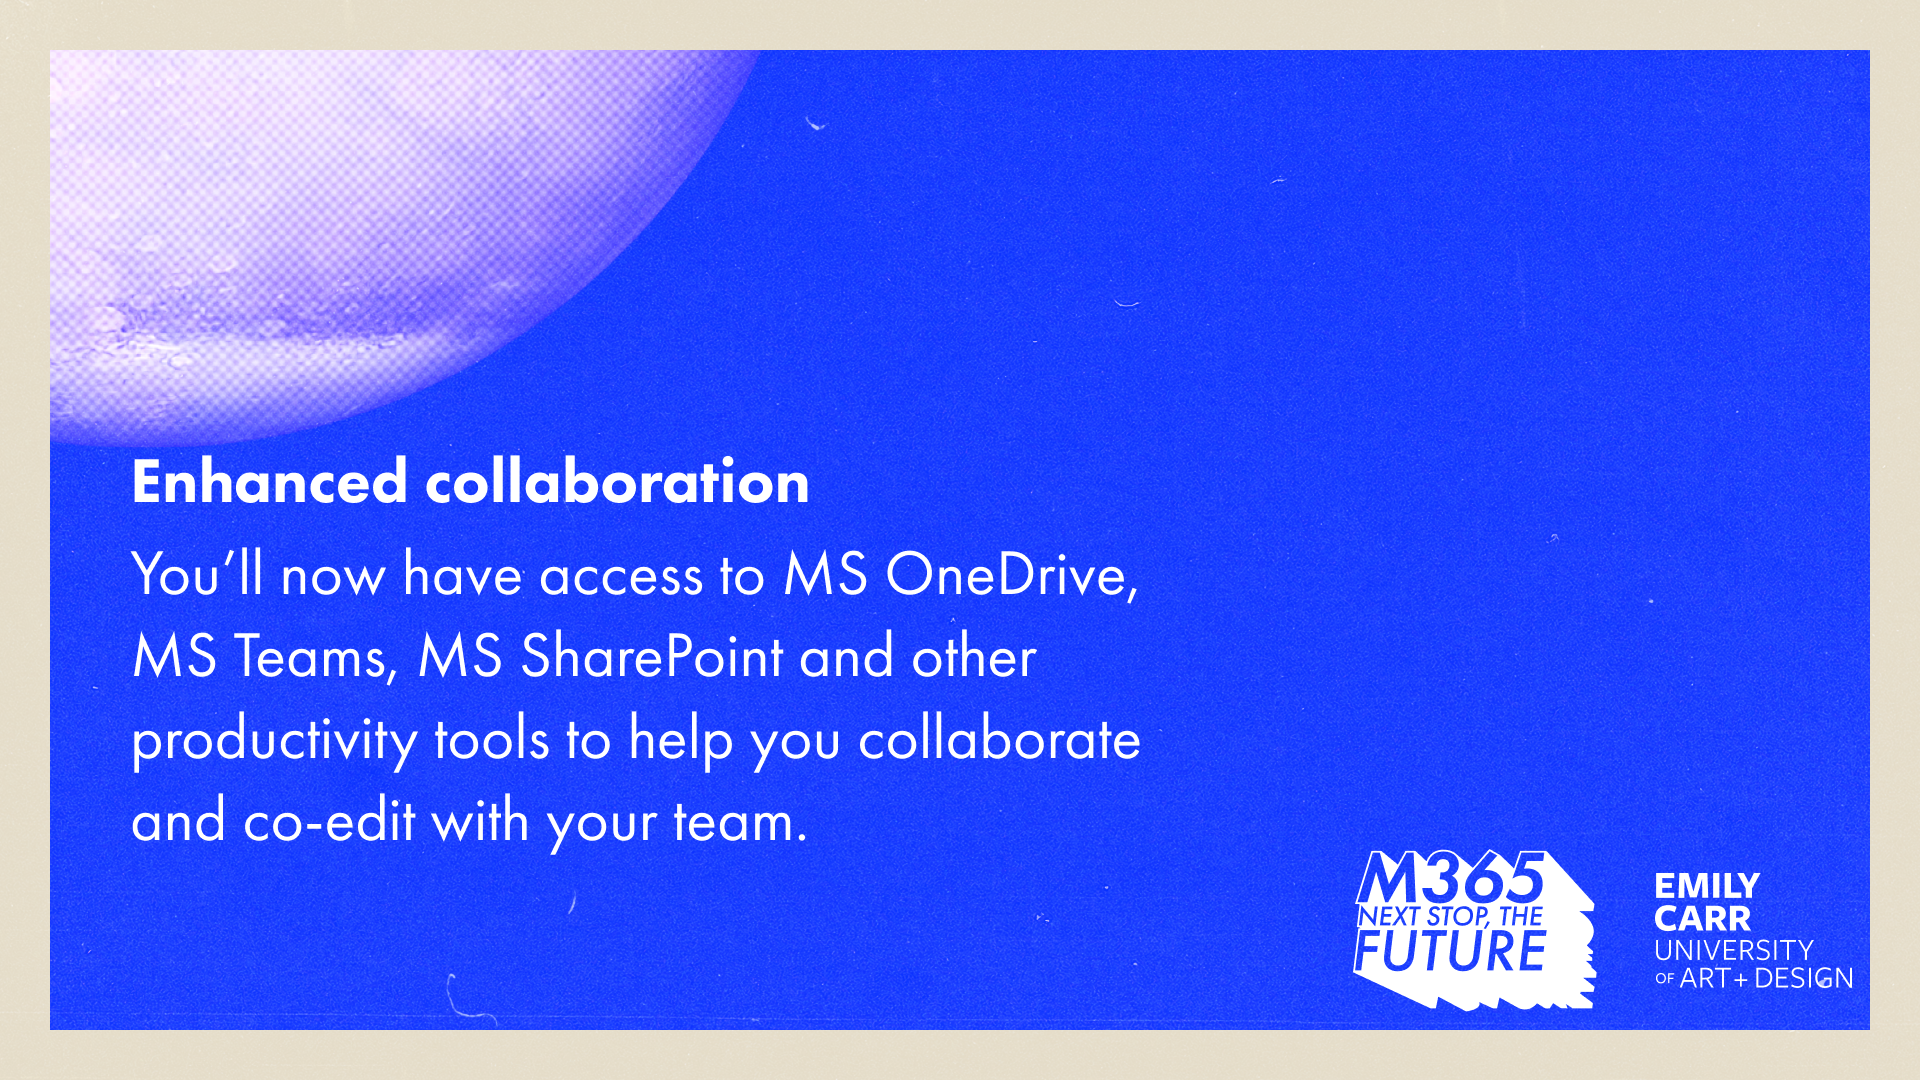 Text reads, "Enhanced collaboration. You’ll now have access to MS OneDrive, MS Teams, MS SharePoint and other productivity tools to help you collaborate and co-edit with your team."